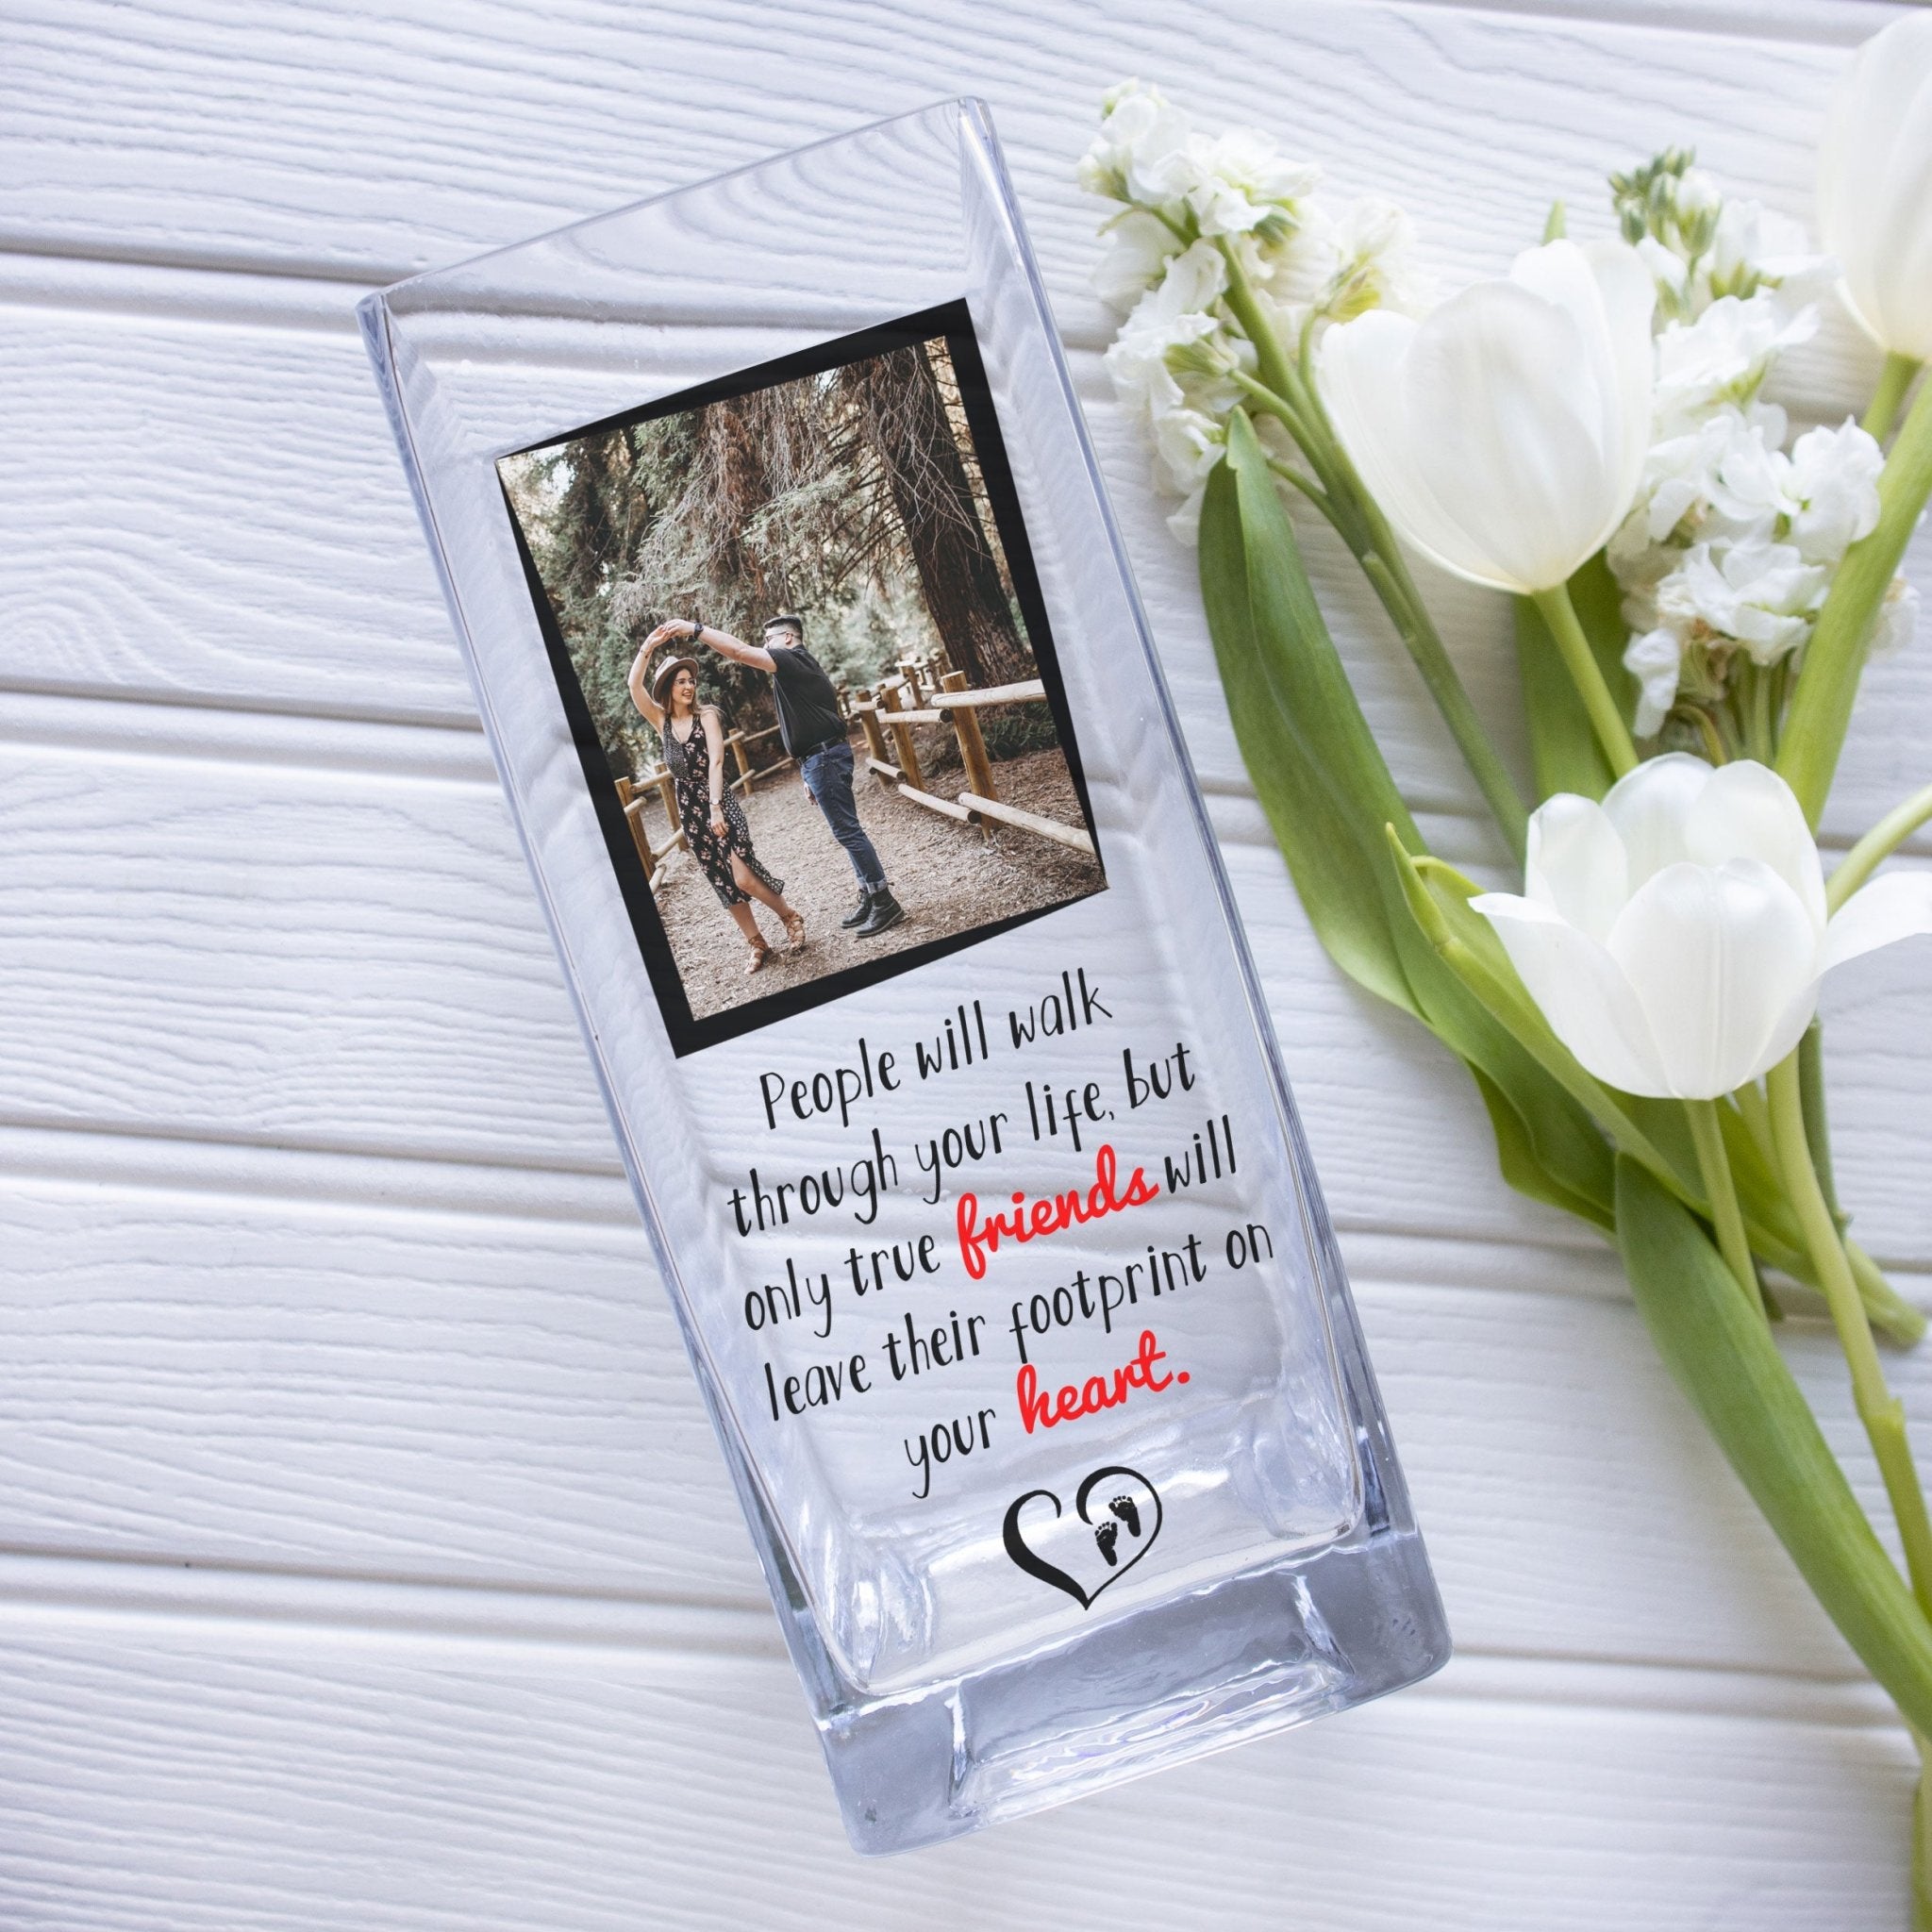 Best Friend Customized Photo Glass Vase | Pal Quotation Cadre Gift Ideas | Personalised Flower Stand with Picture | Crystal Decor Present Vase - Unique Prints